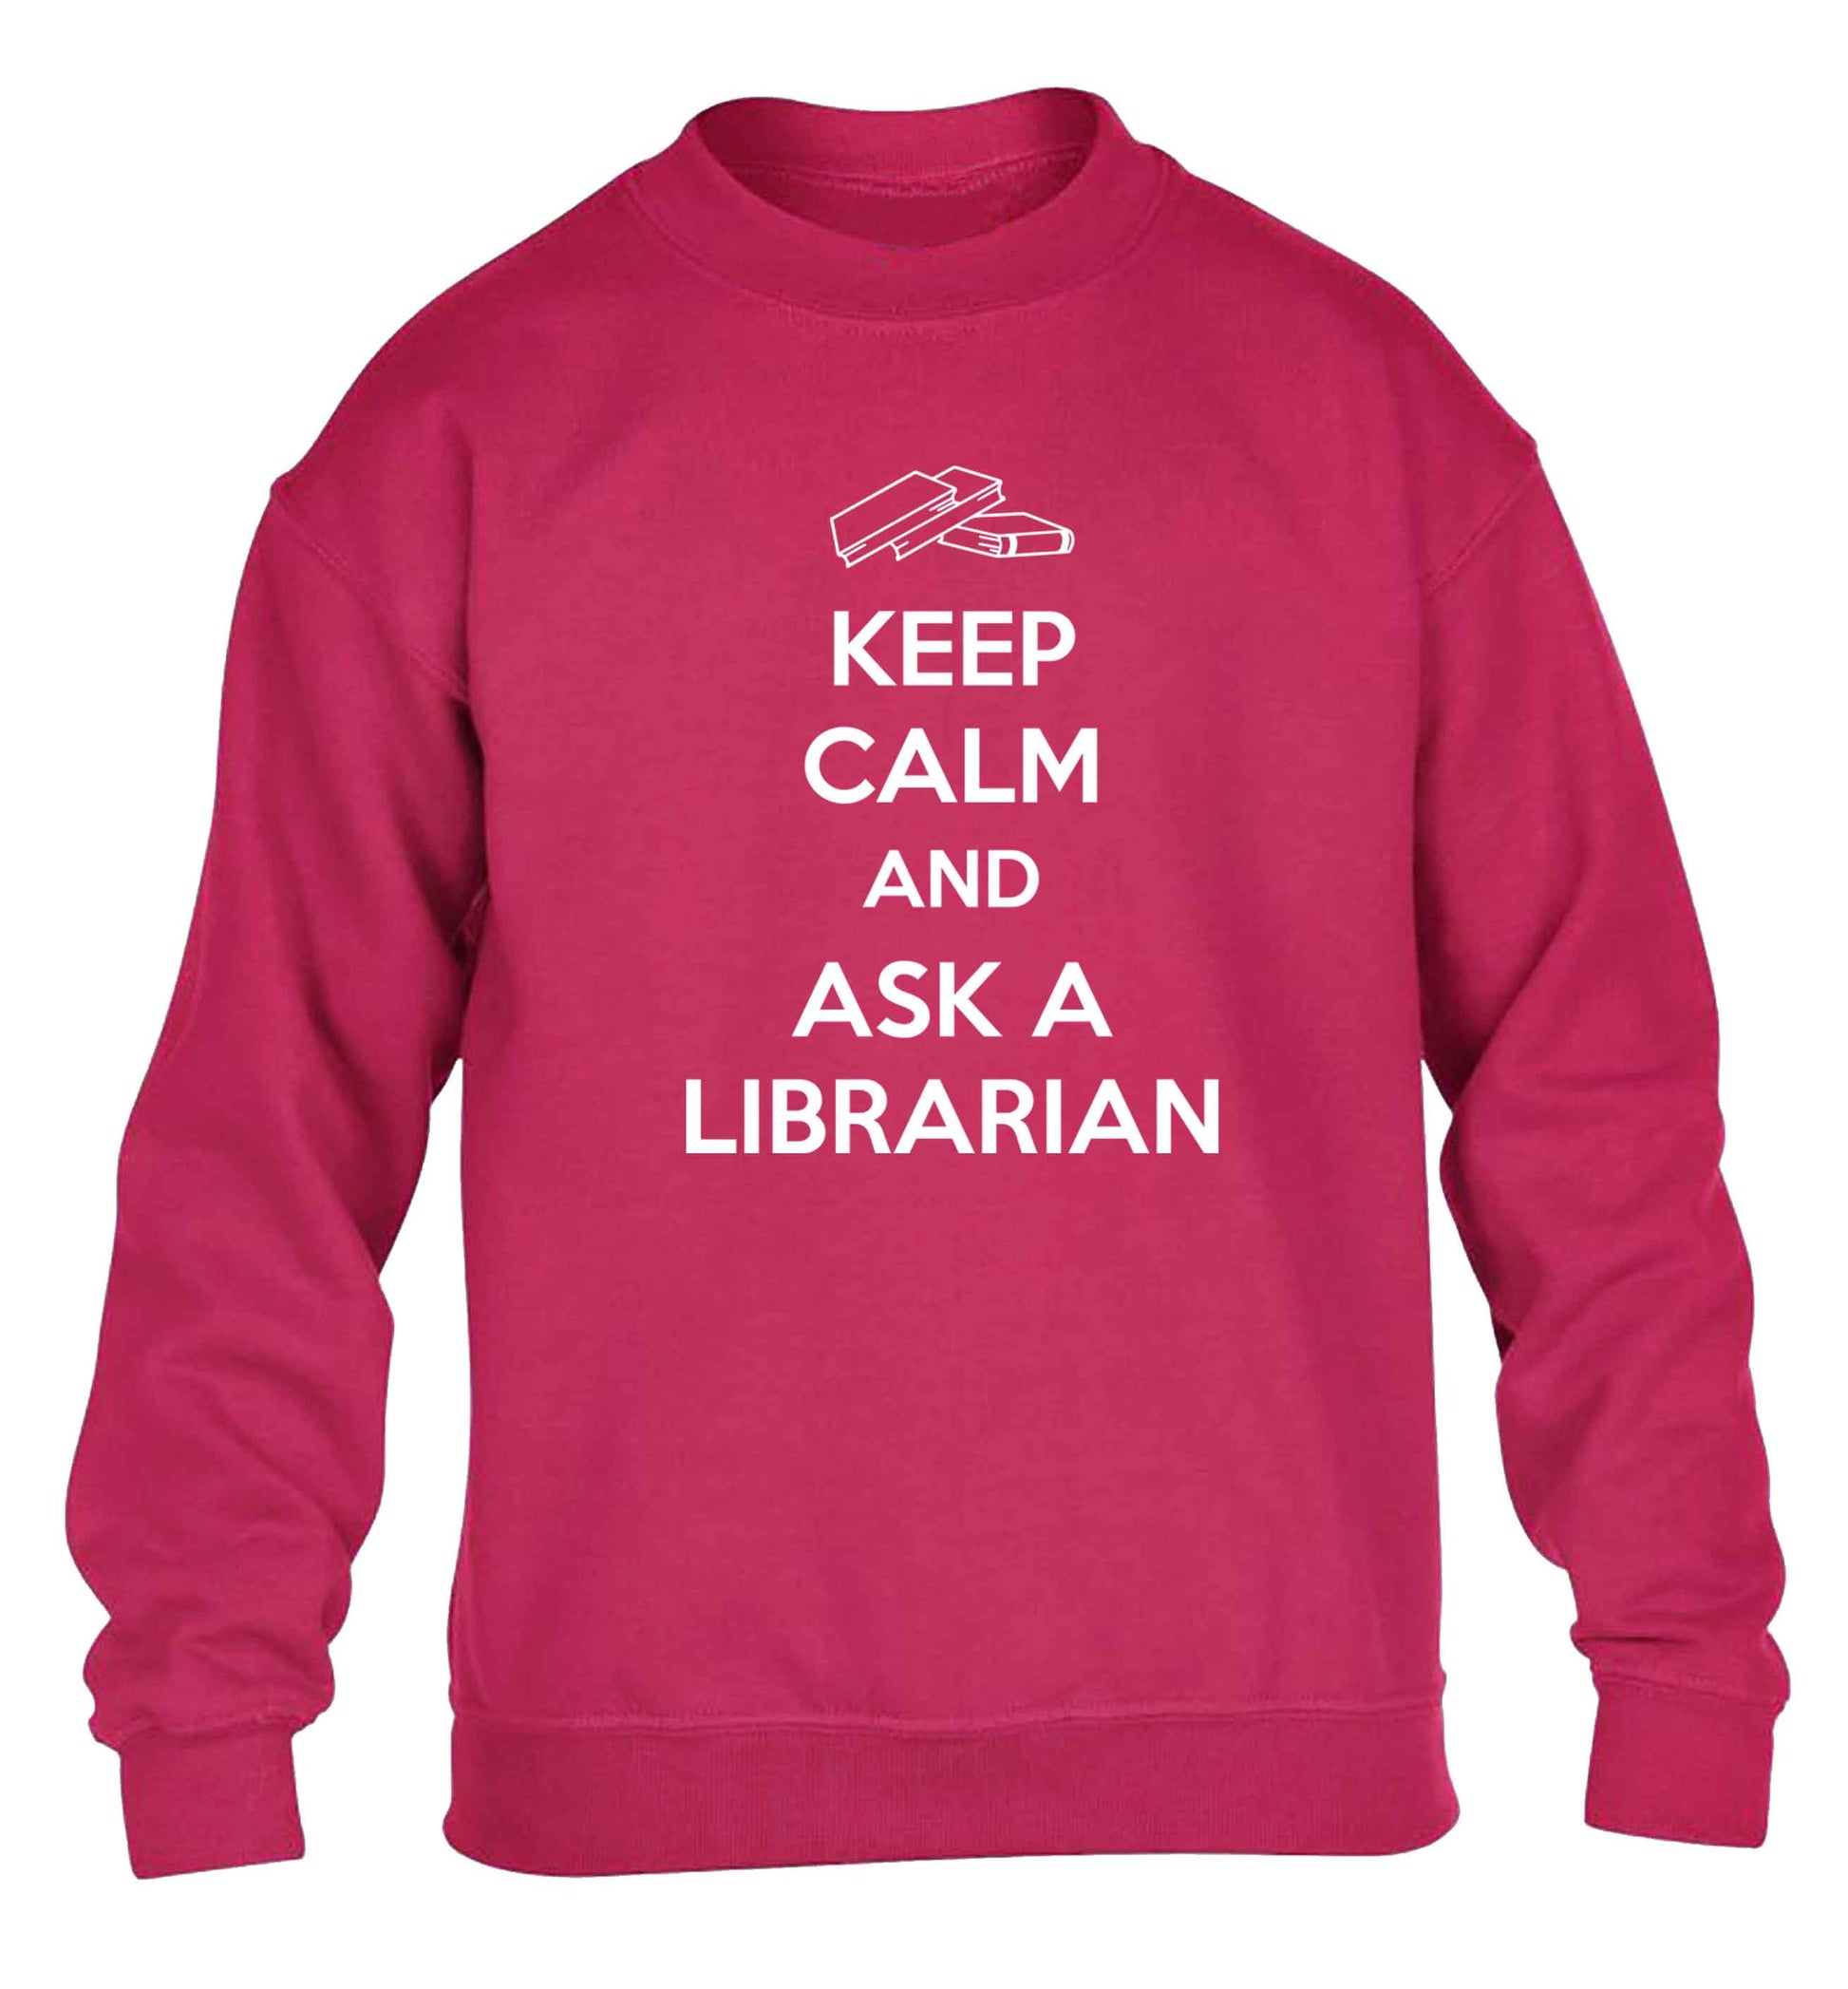 Keep calm and ask a librarian children's pink sweater 12-13 Years